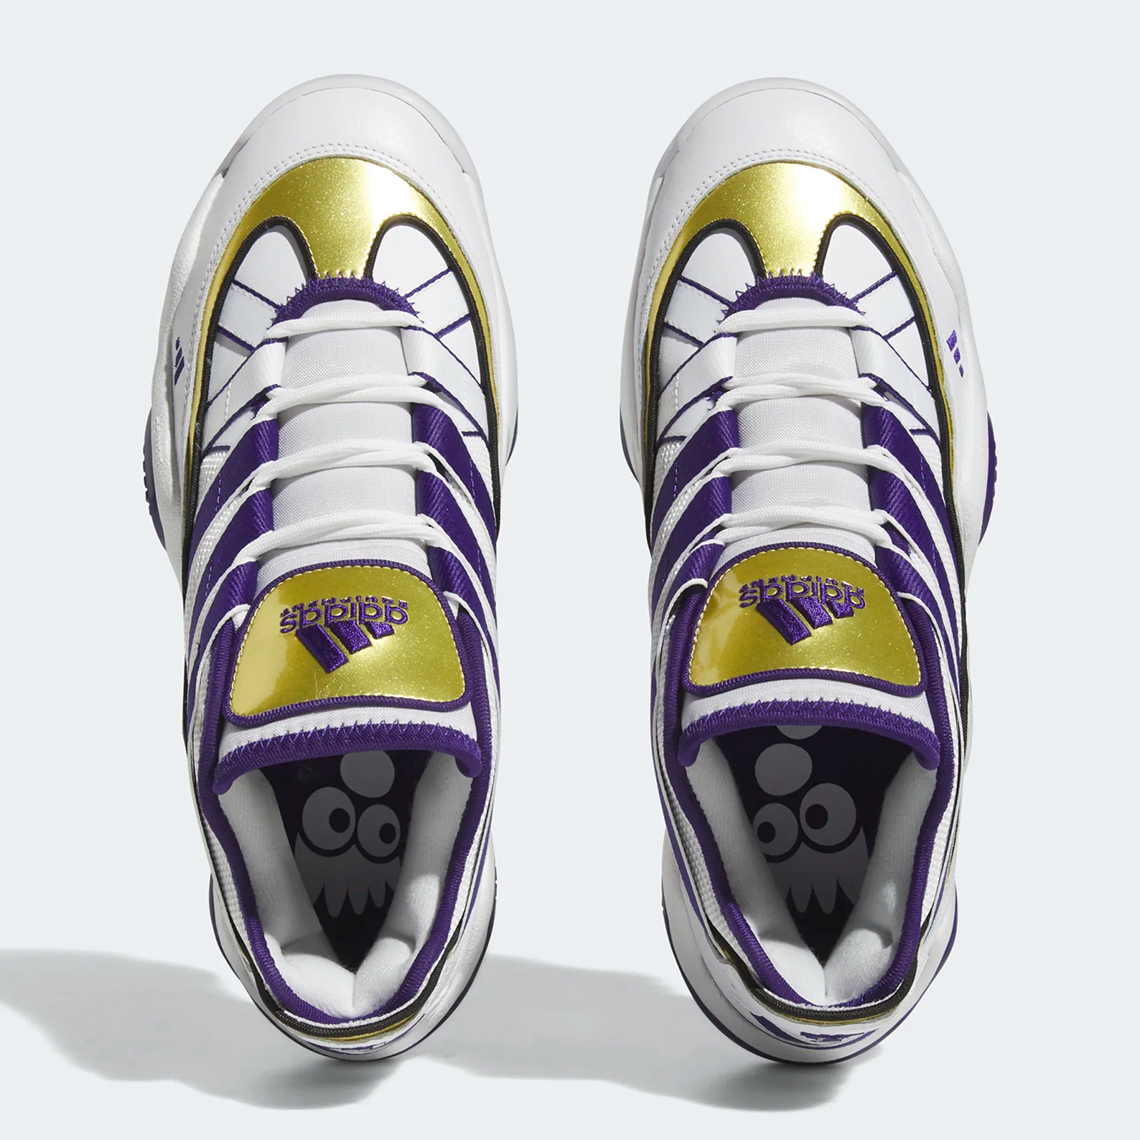 adidas schemes Top Ten 2010 Lakers Hq4624 9